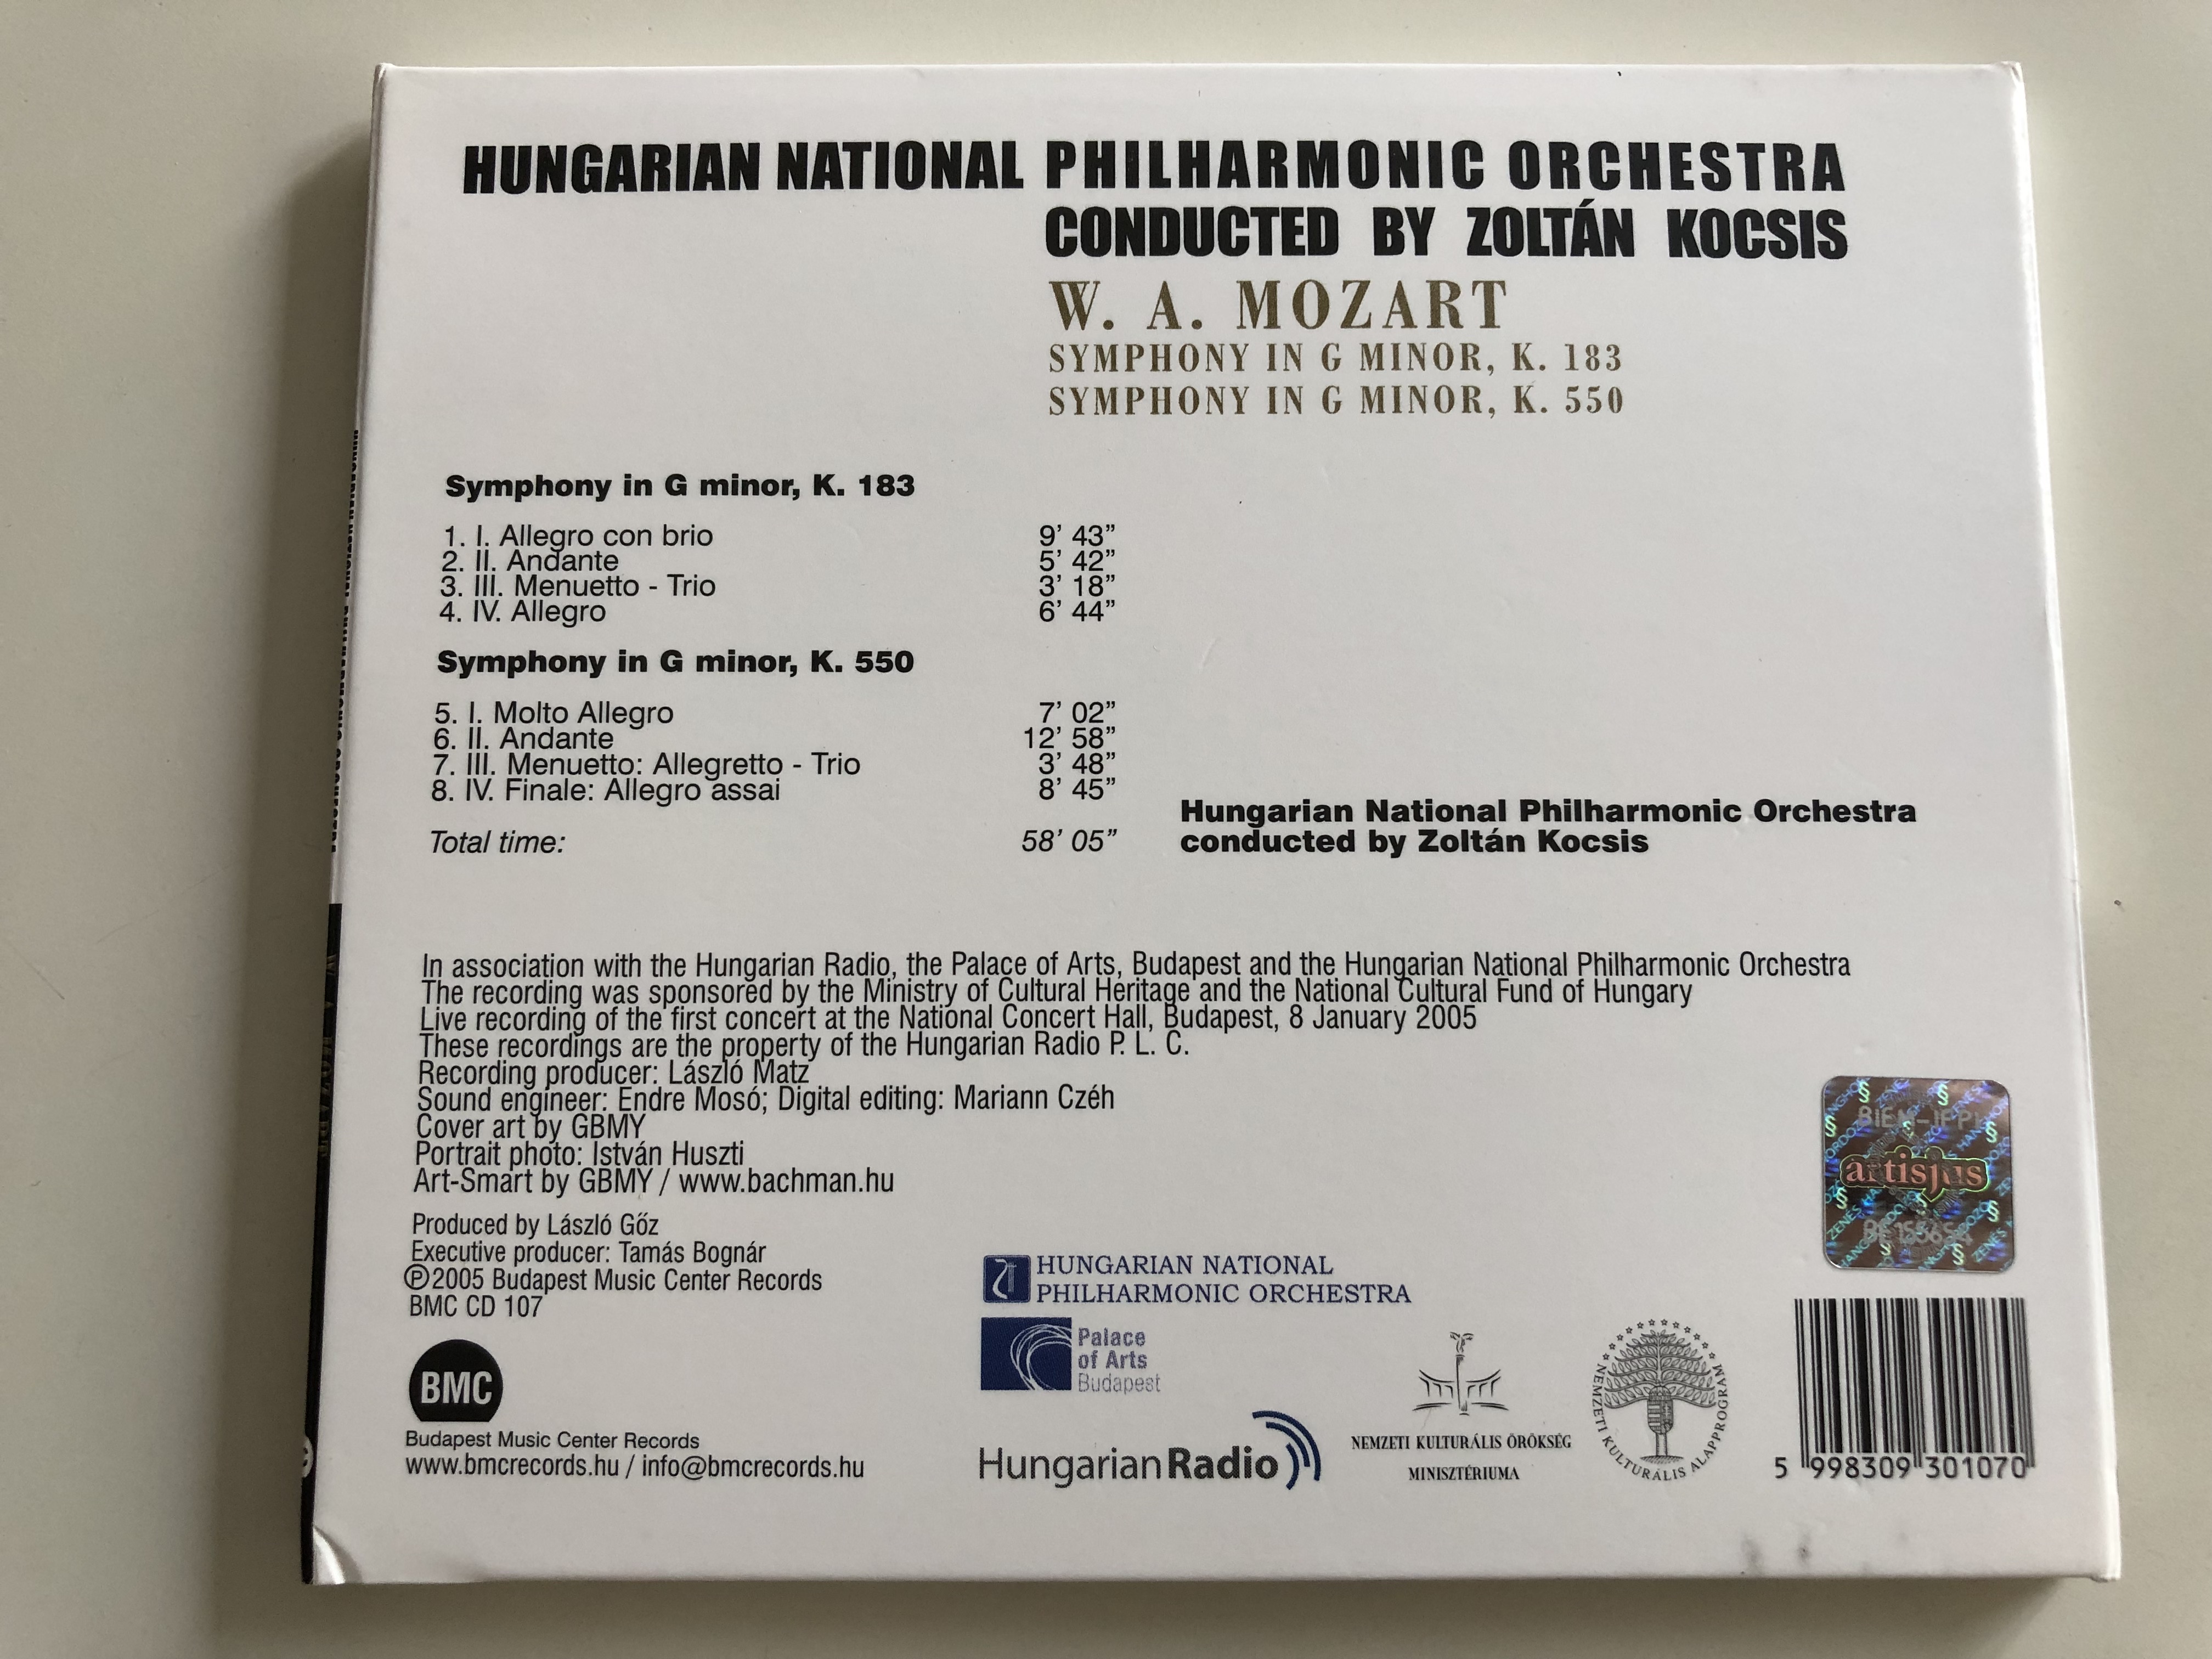 w.-a-mozart-symphony-in-g-minor-k-183-550-hungarian-national-philharmonic-orchestra-conducted-by-zolt-n-kocsis-audio-cd-2005-bmc-cd-107-4-.jpg